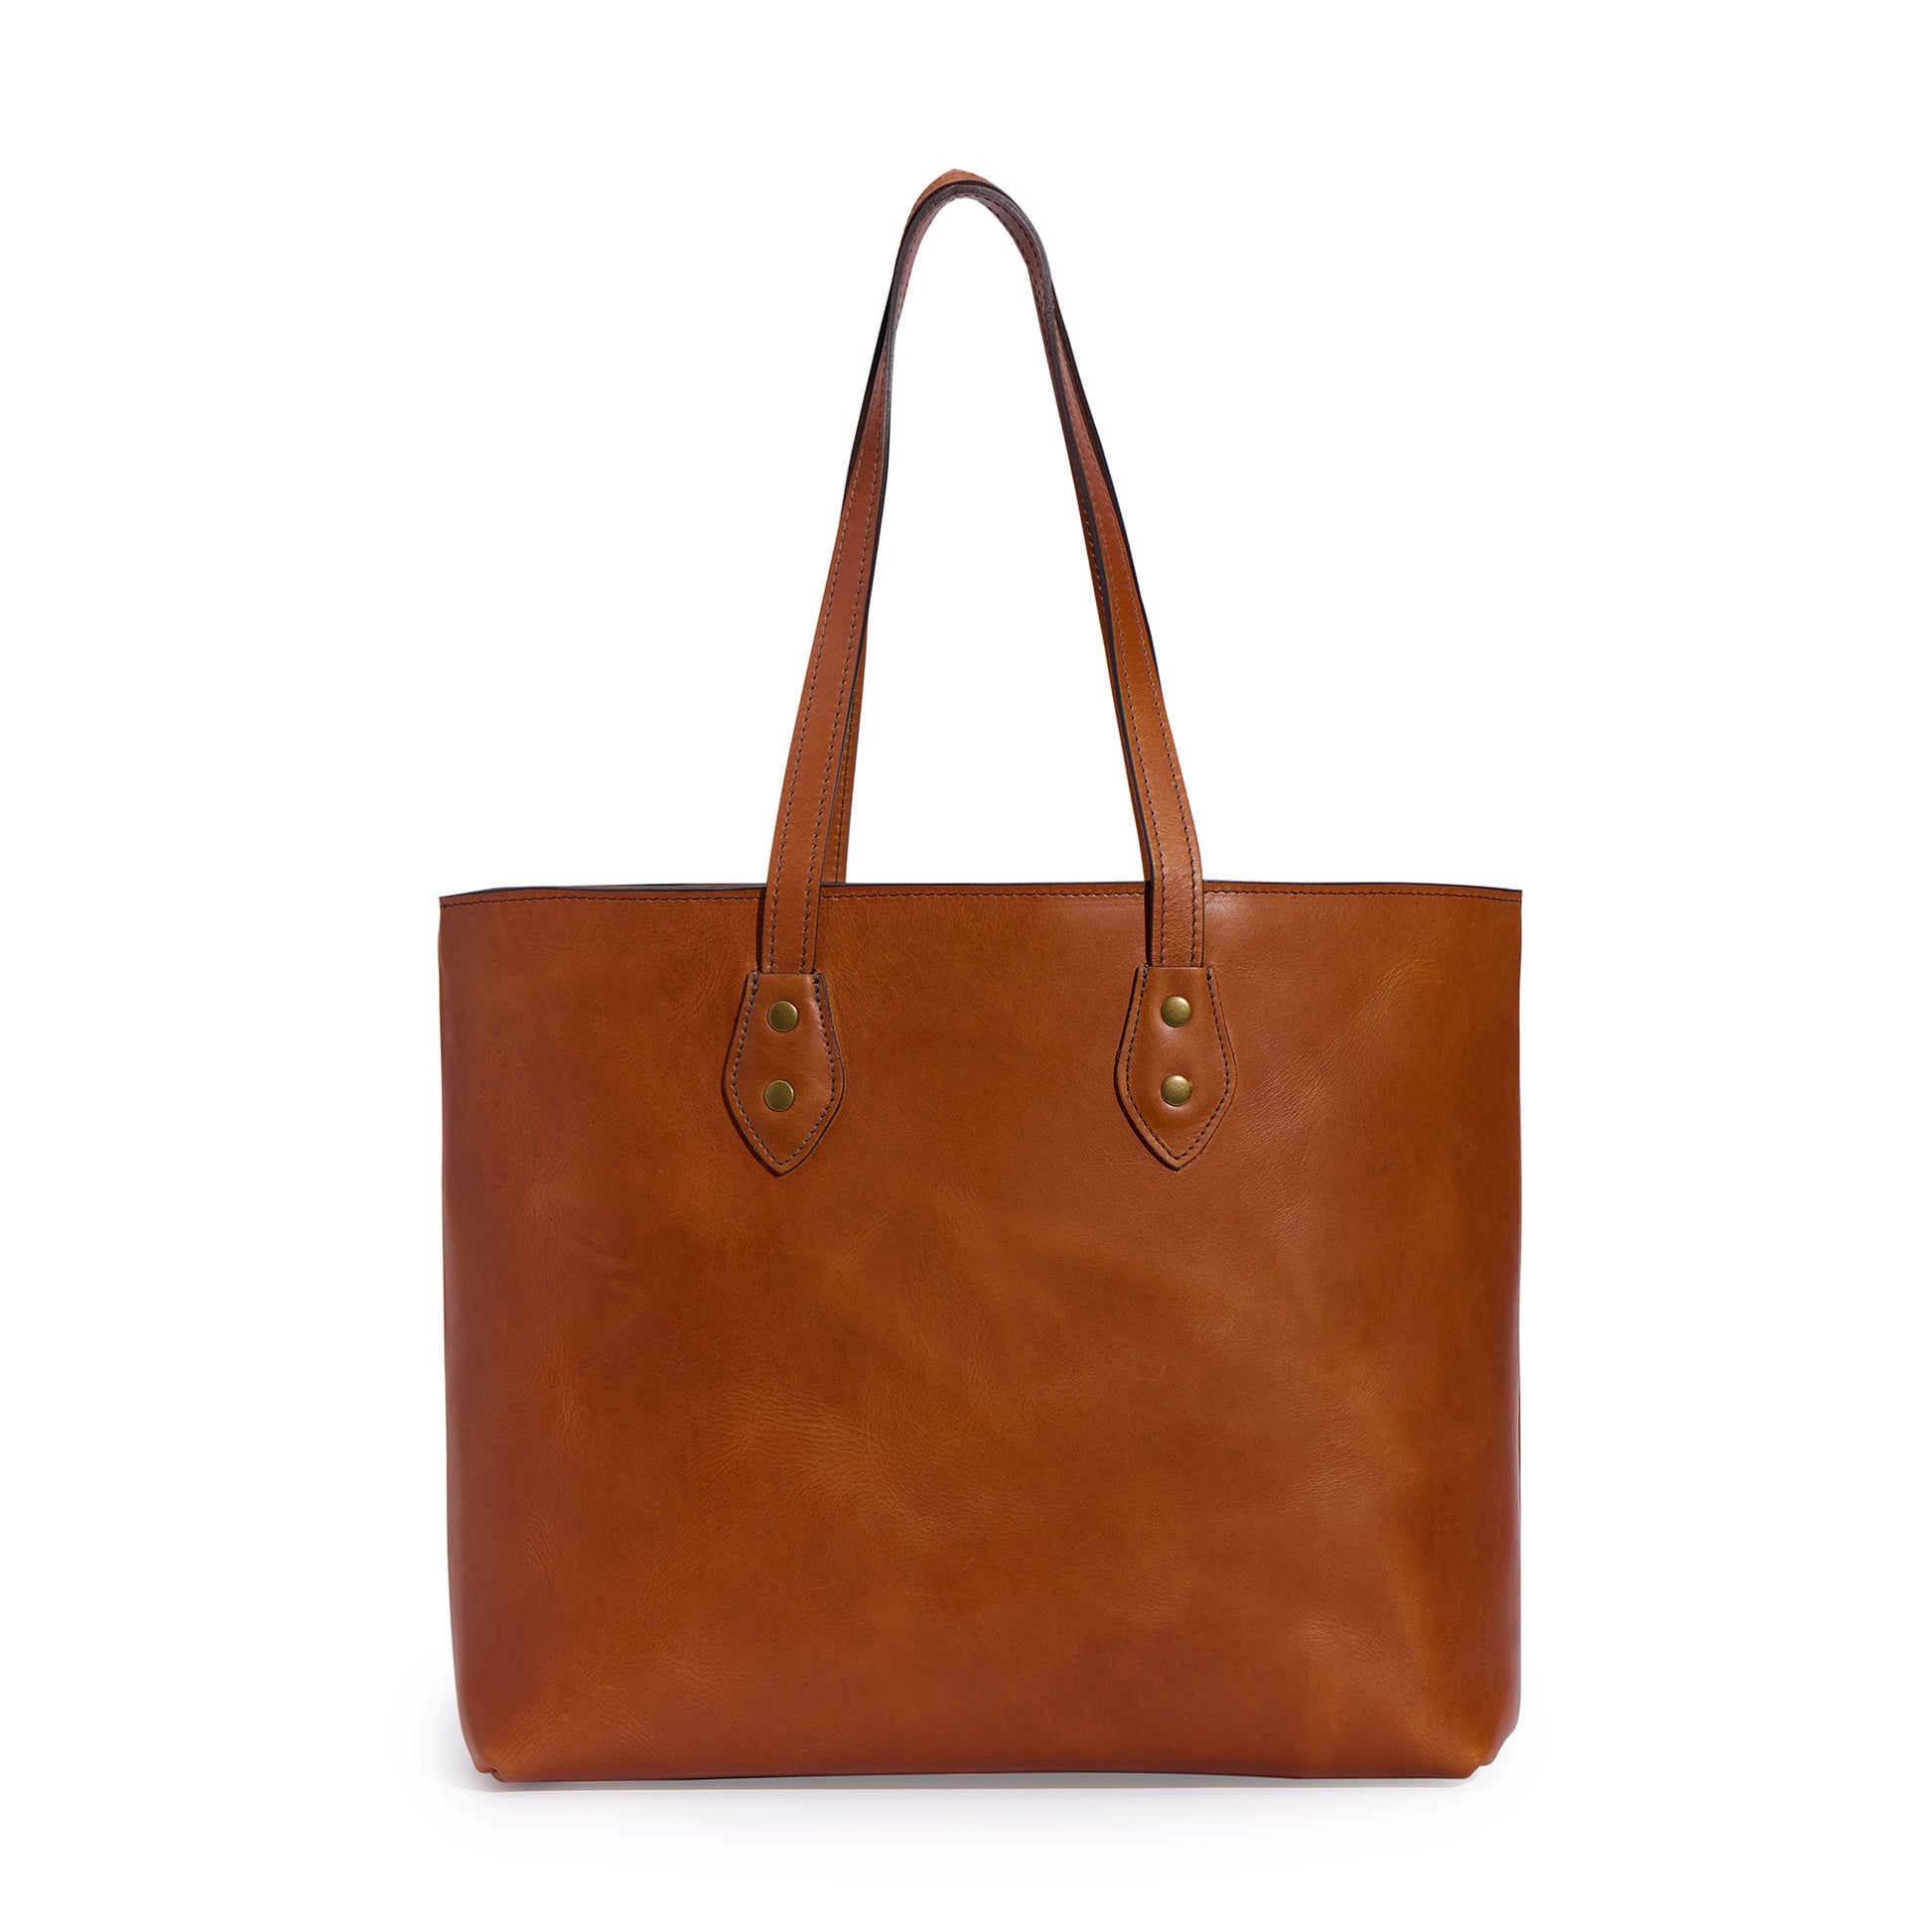 full grain leather tote bag in saddle tan color by Jackson Wayne - front 